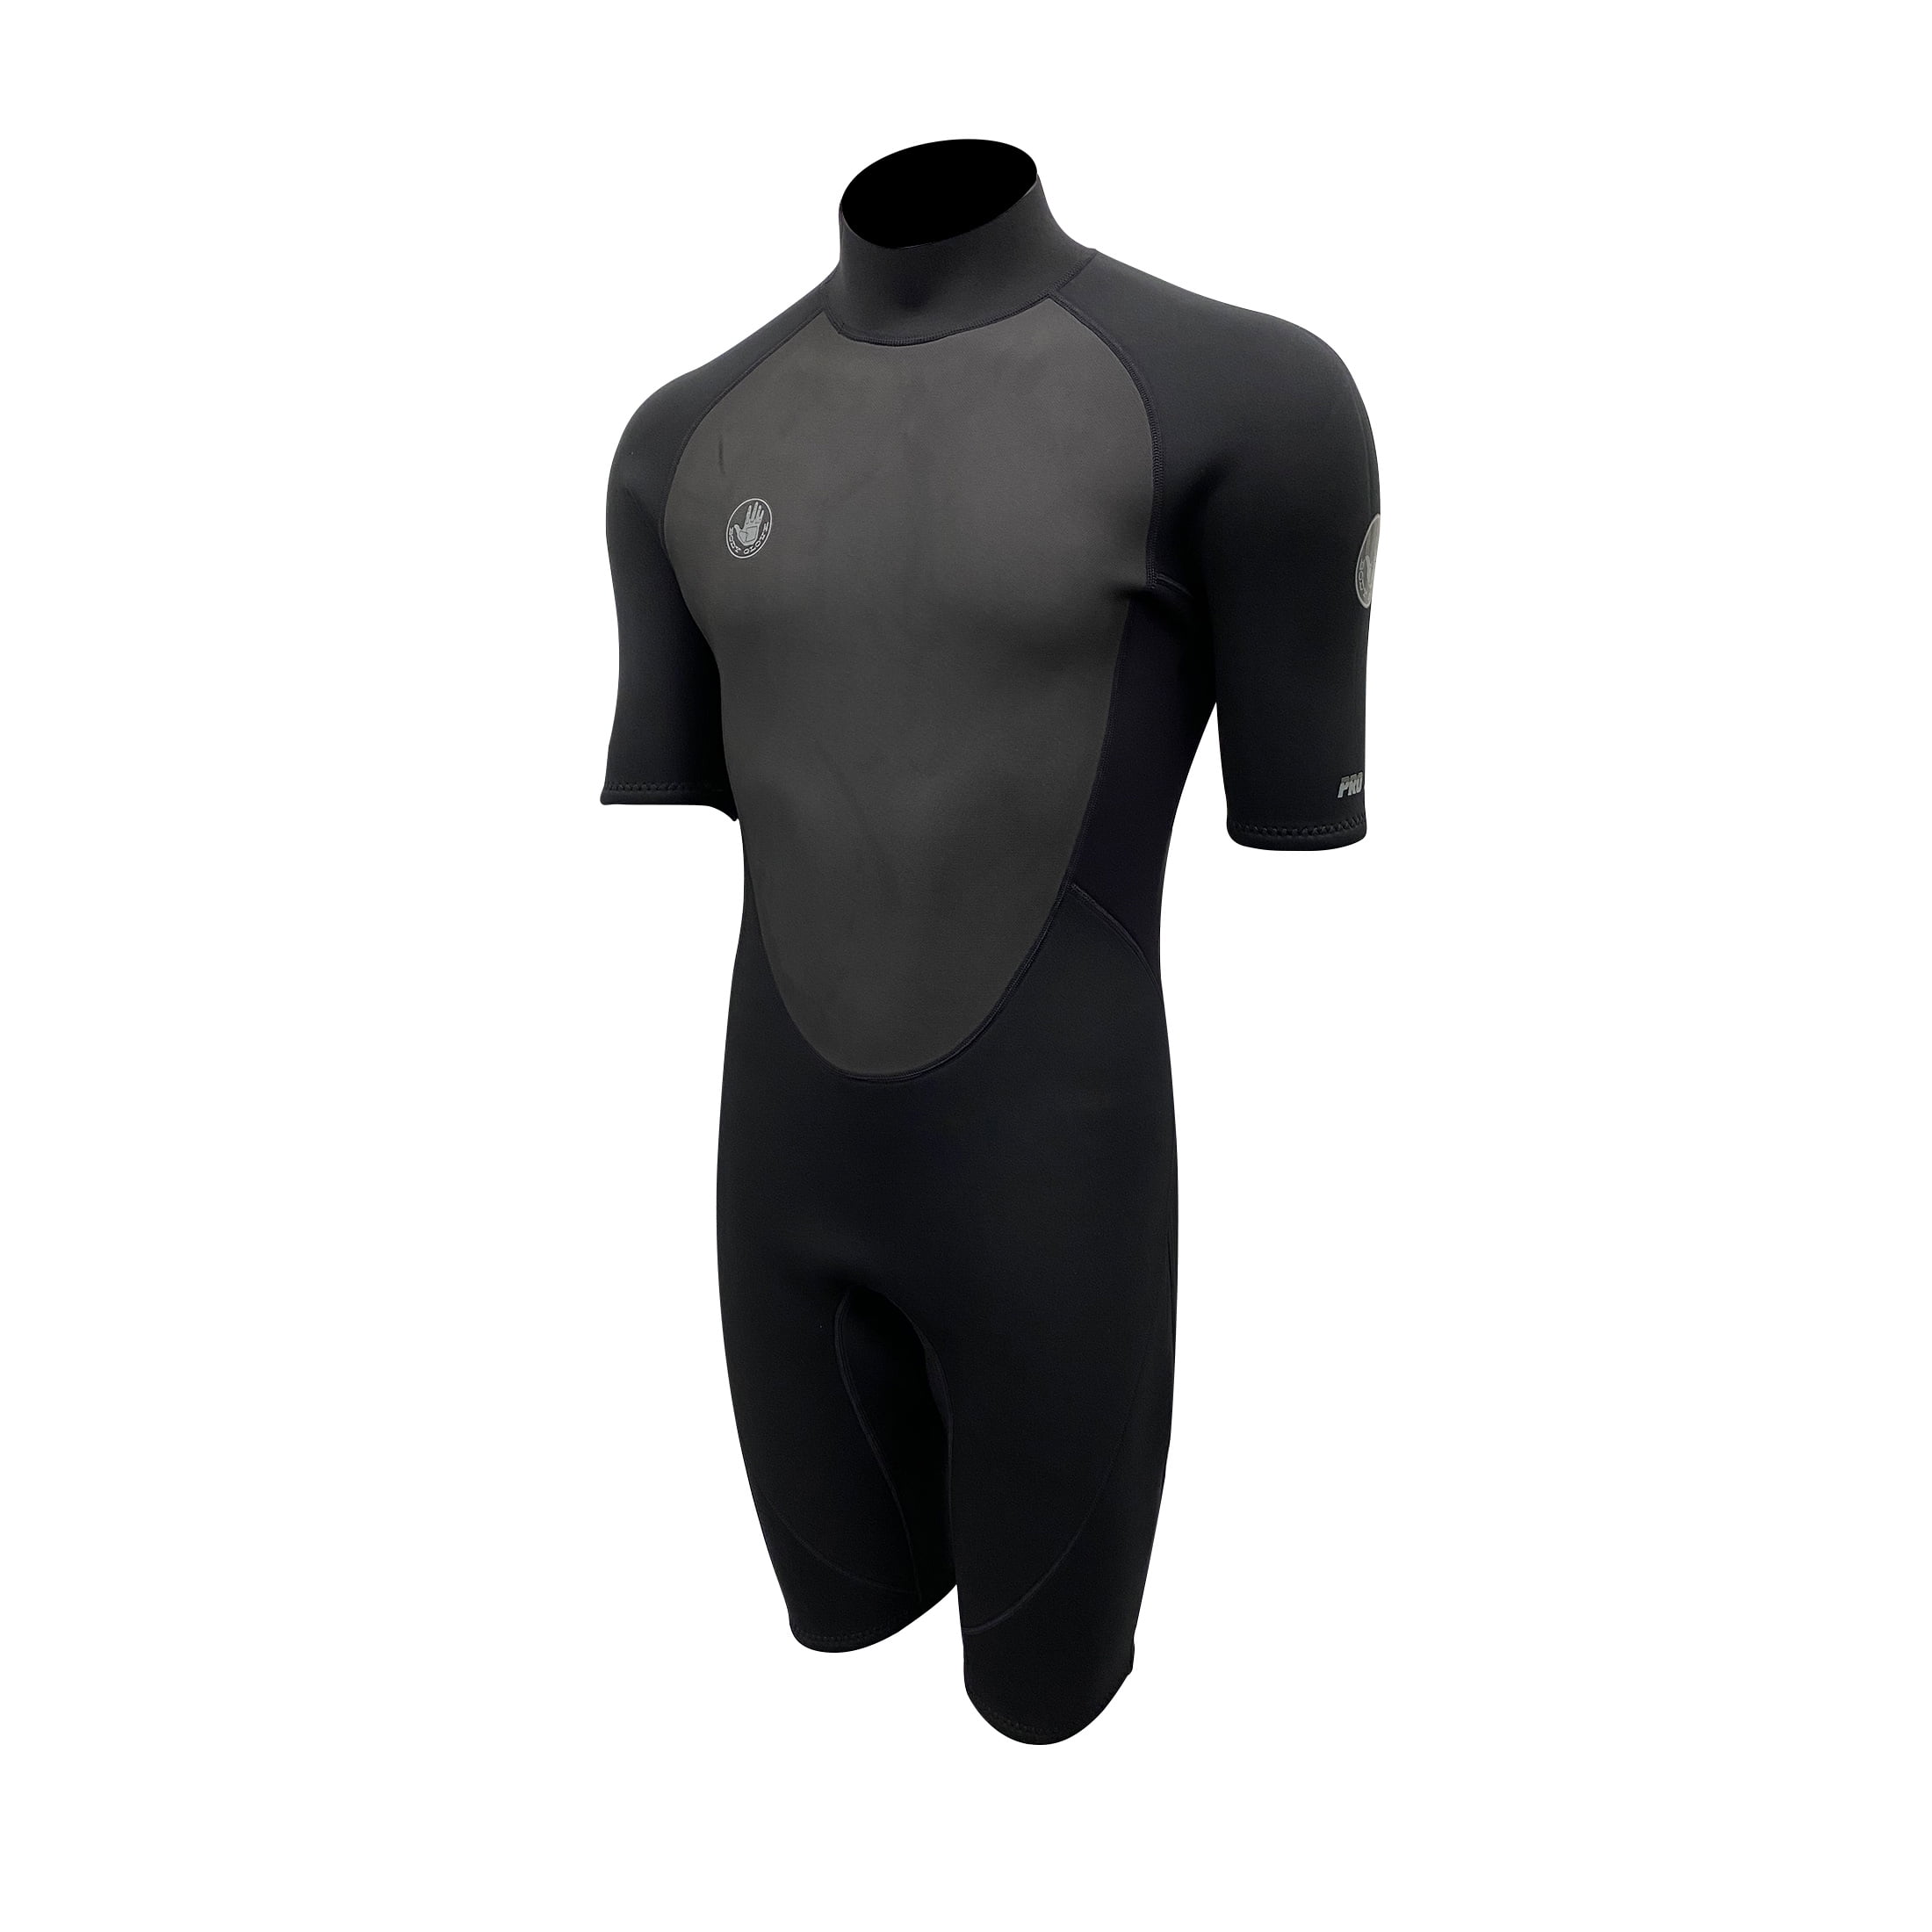 Details about   Ultra-thin WetSuit Full Body Super stretch Diving Suit Swim Surf Snorkeling F5 